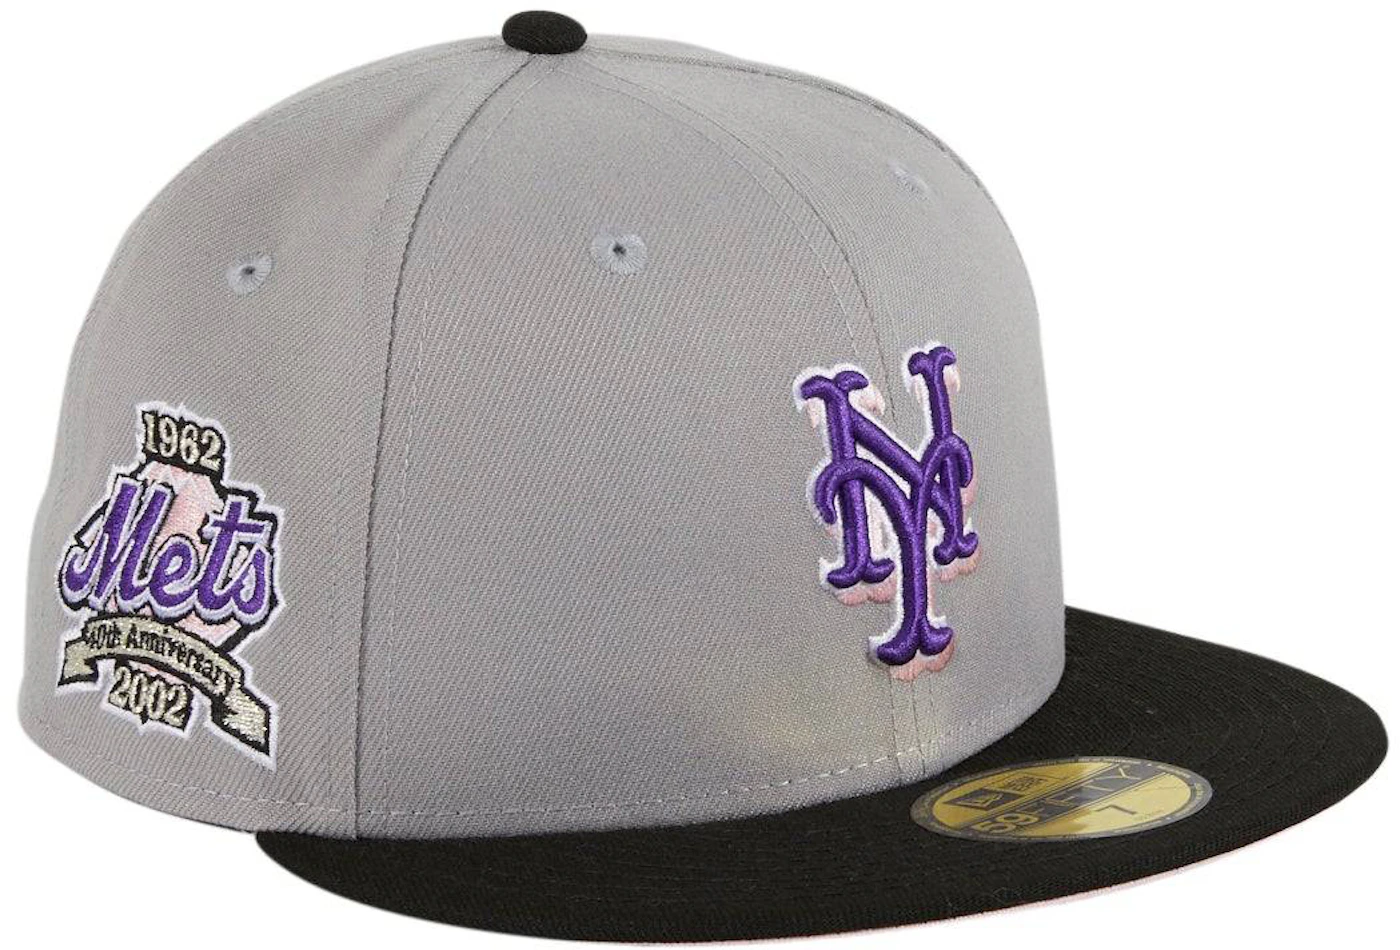 New Era 59FIFTY New York Mets 60th Anniversary Patch Game Hat - Royal